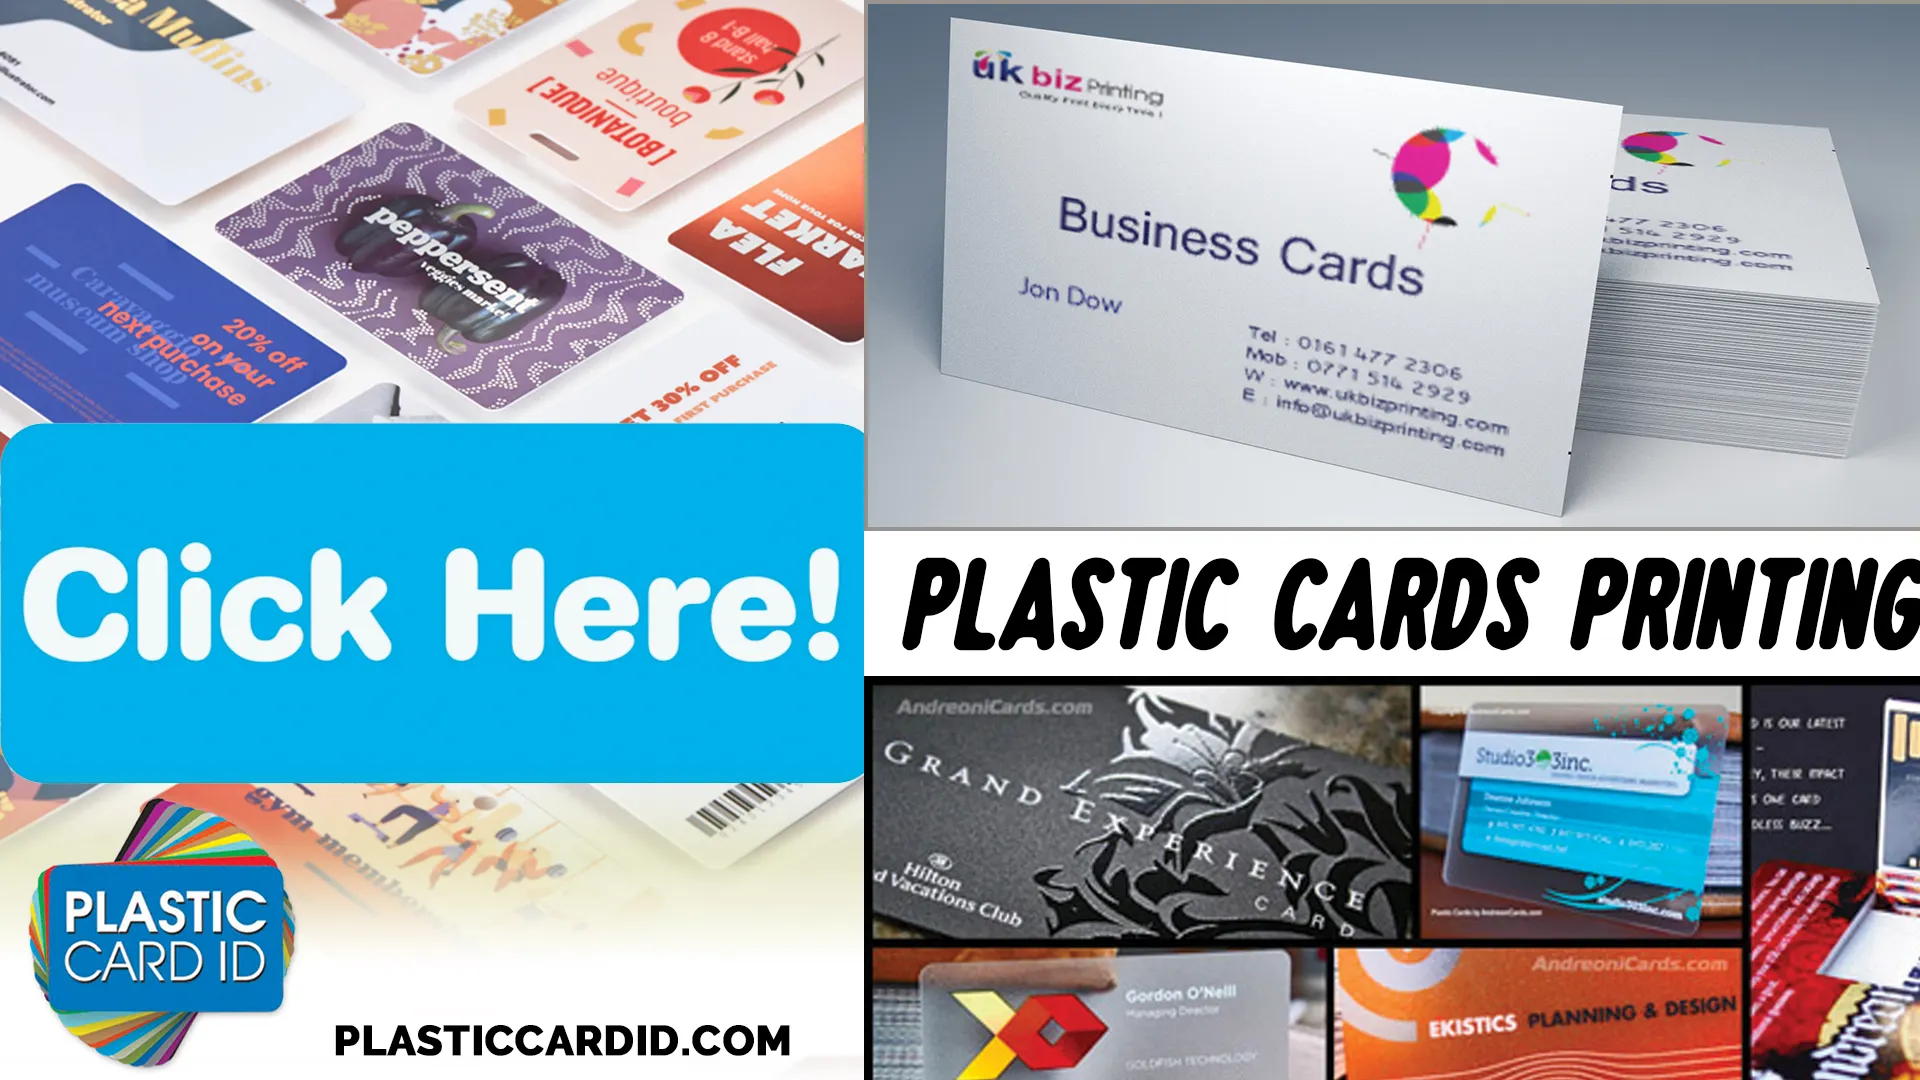 Understanding the Versatility and Uses of Plastic Cards